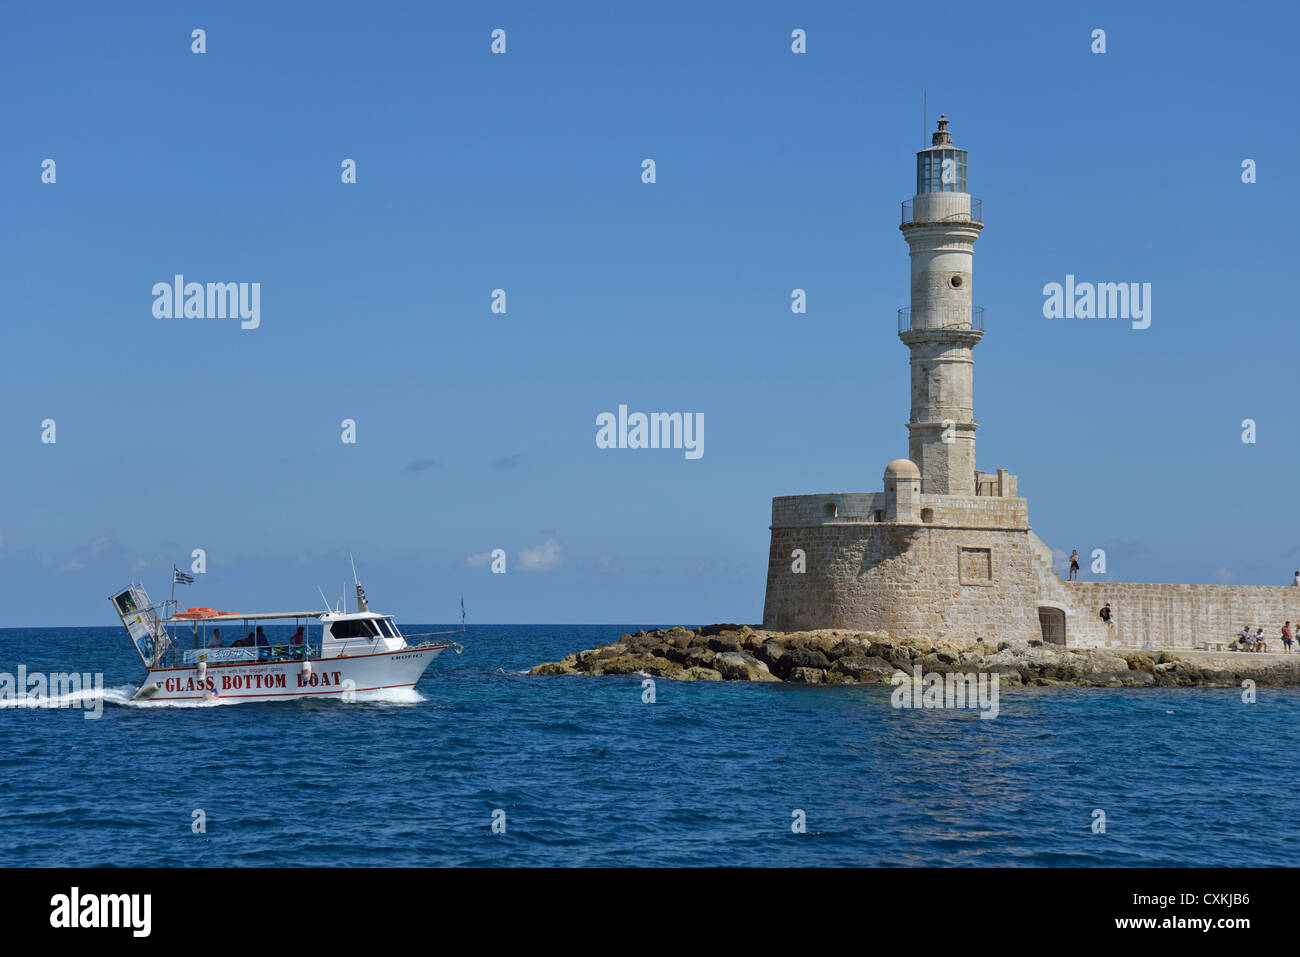 Old lighthouse at entrance to Venetian Harbour, Chania, Chania Prefecture, Crete, Greece Stock Photo